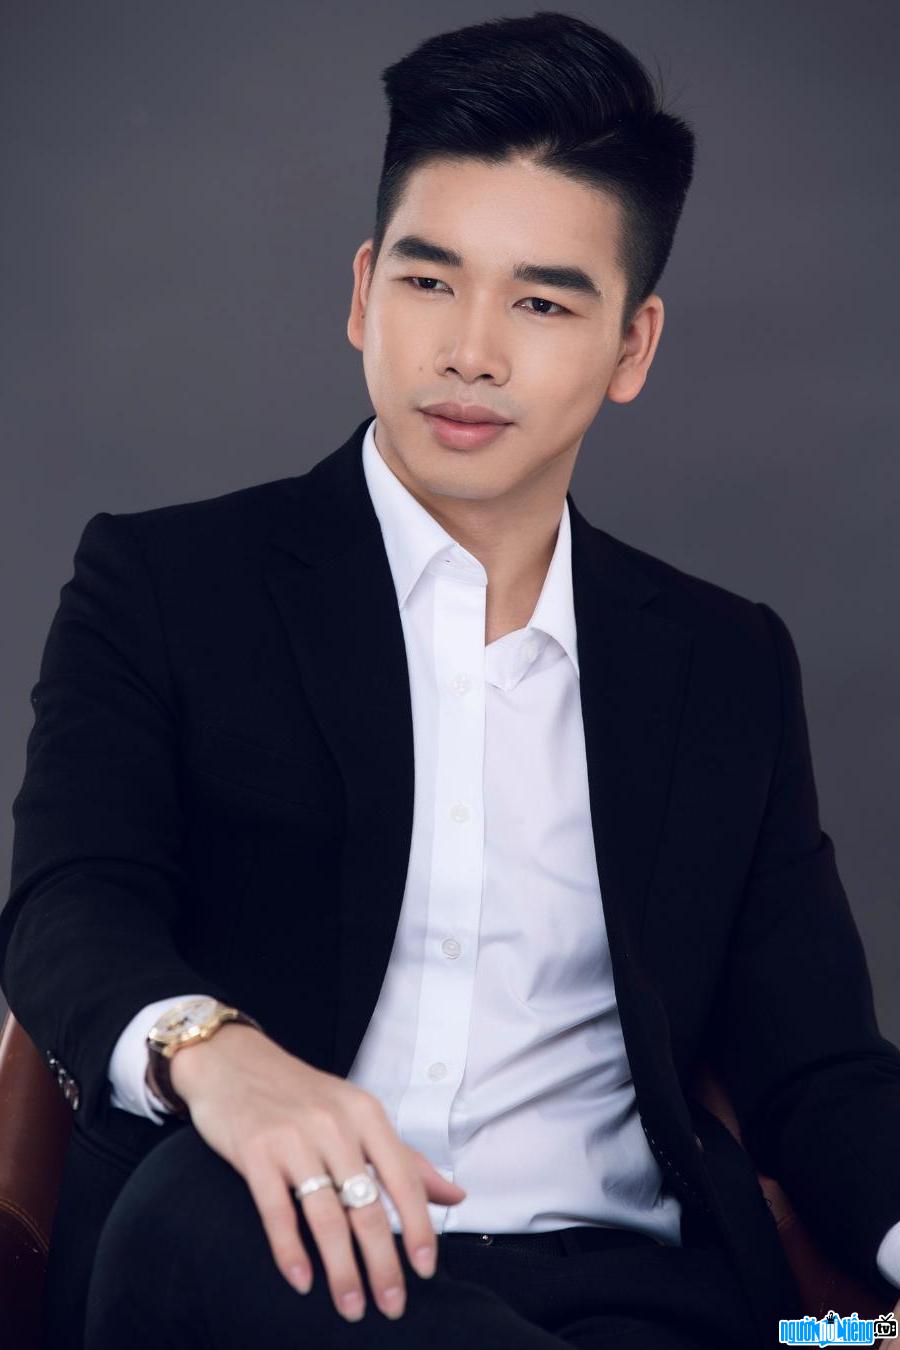  Latest pictures of Master Quan Nguyen